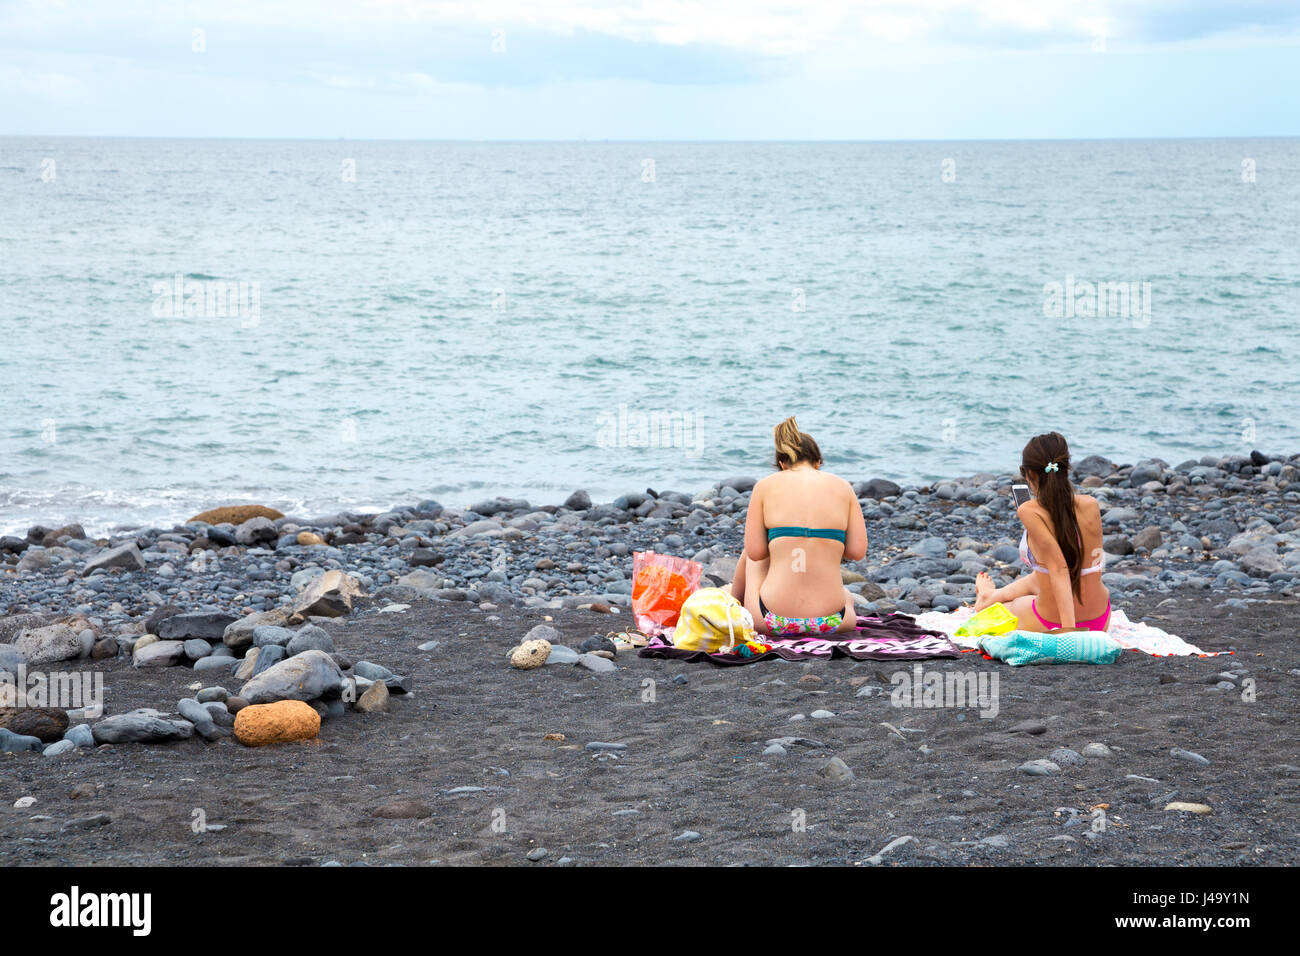 Two women sitting on a black send, volcanic beach, looking out to sea in Tenerife, Spain Stock Photo